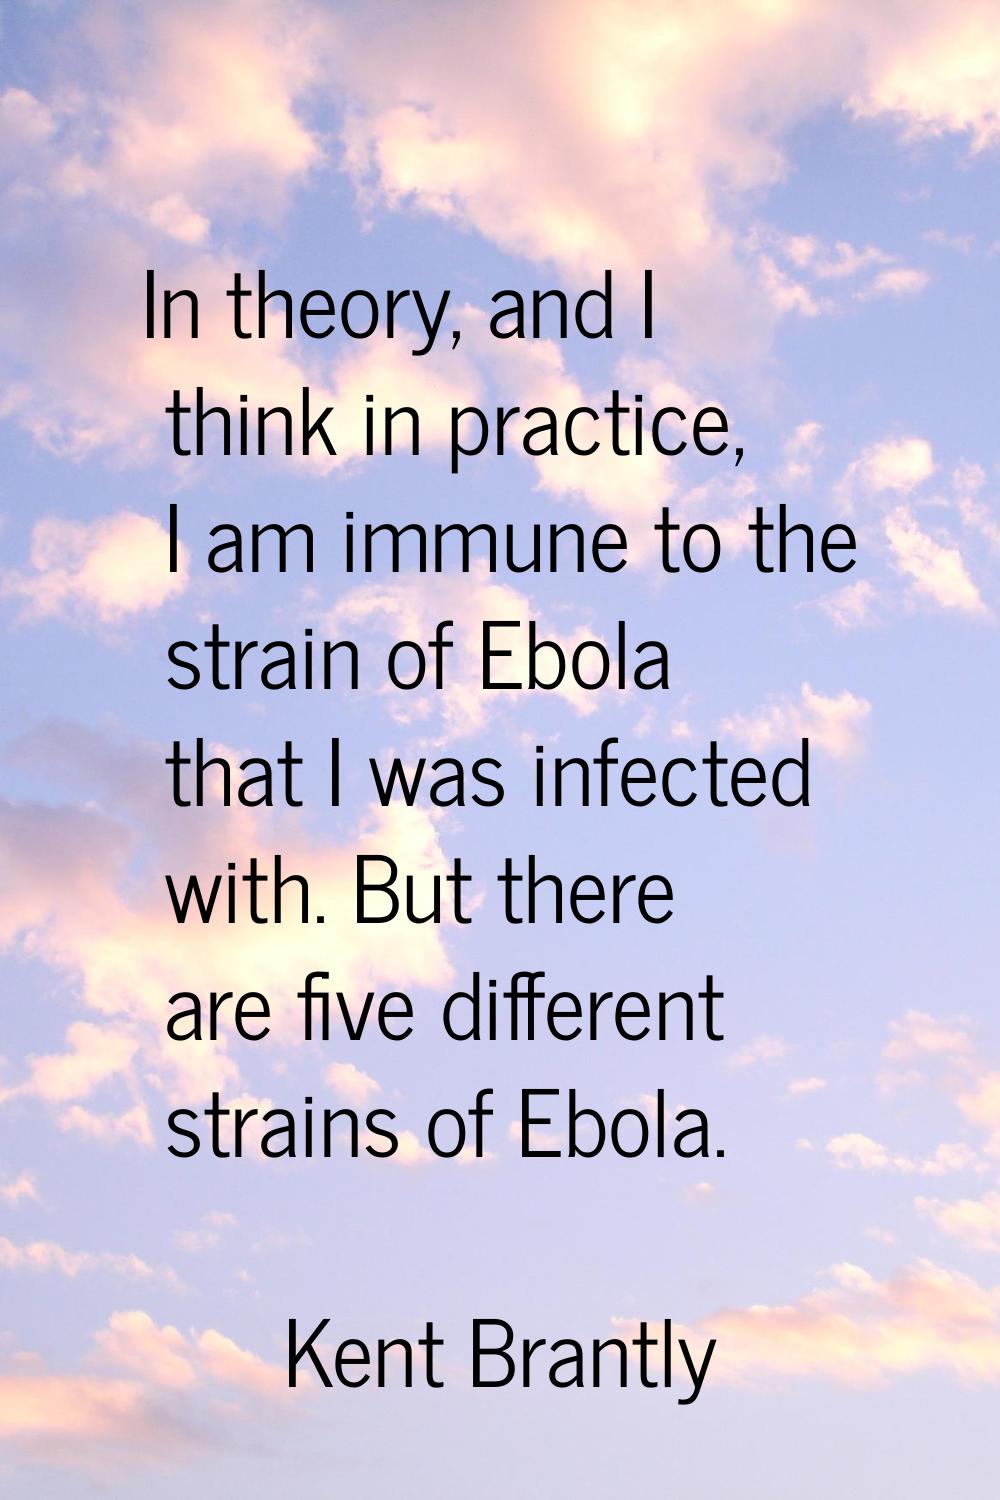 In theory, and I think in practice, I am immune to the strain of Ebola that I was infected with. Bu